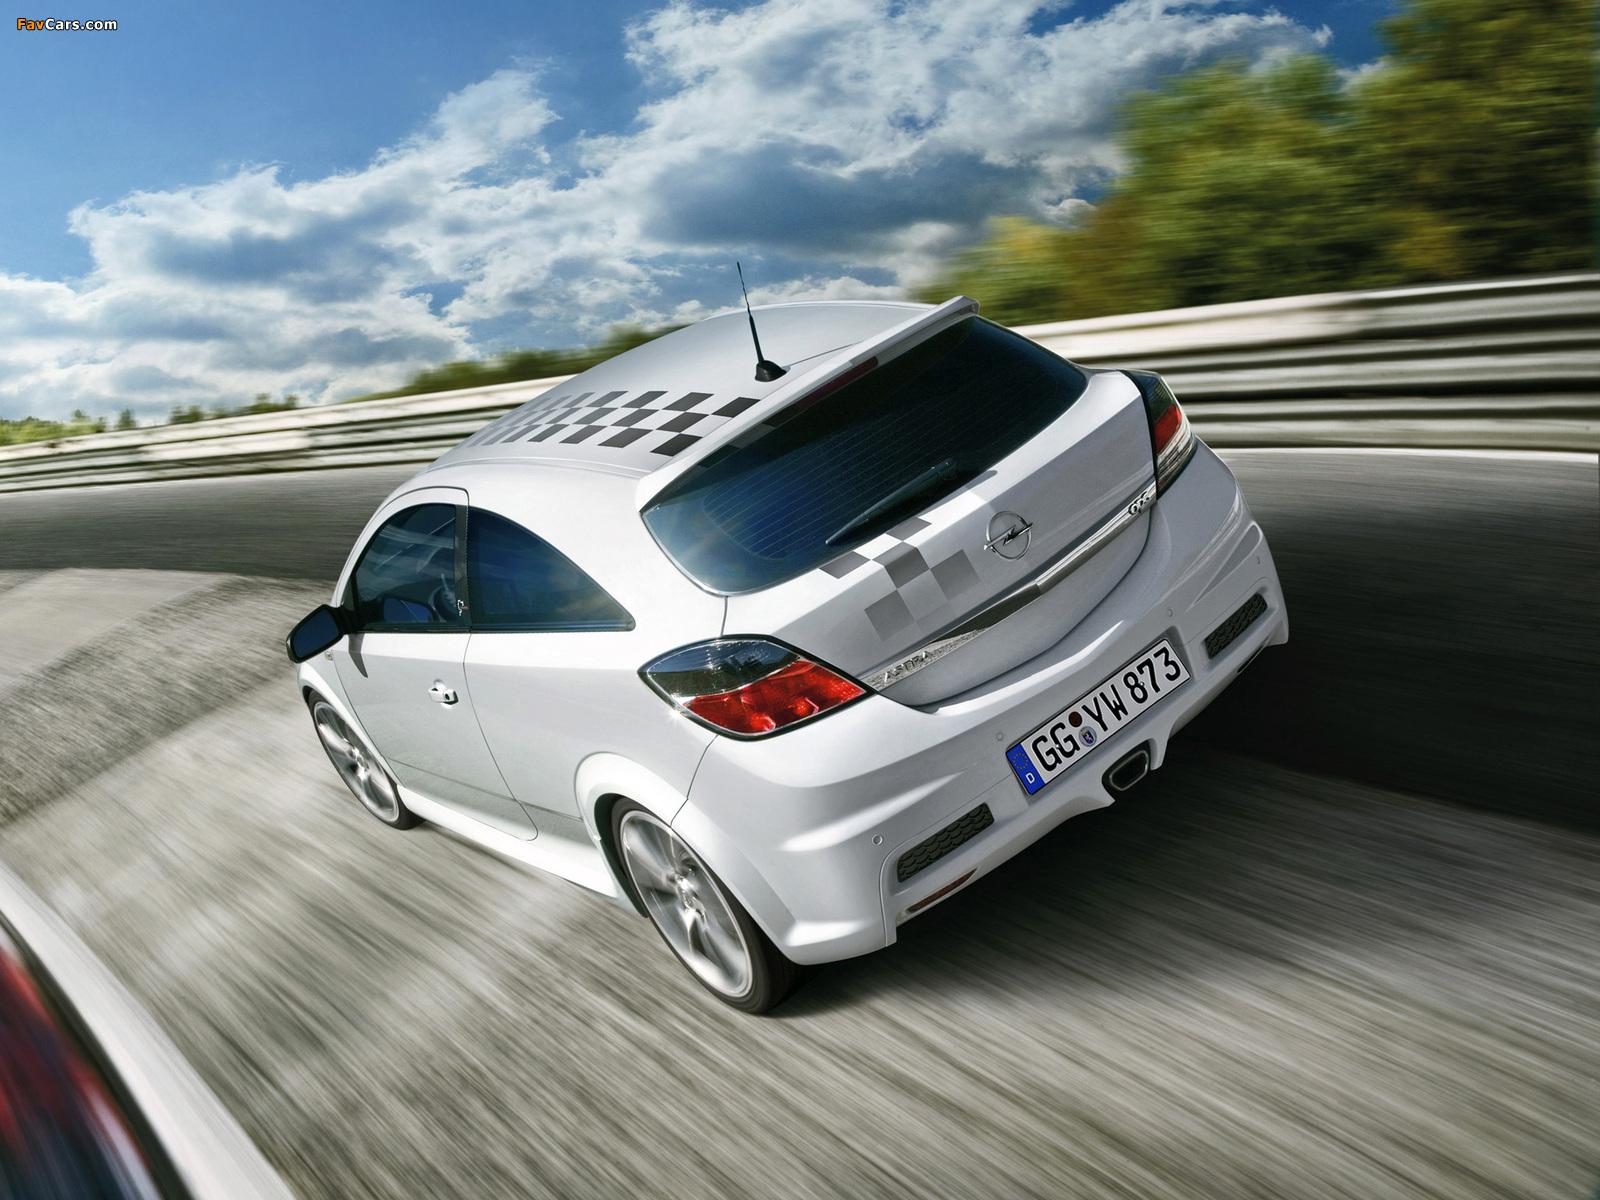 Opel Astra OPC Nürburgring Edition (H) 2008 wallpaper (1600x1200)